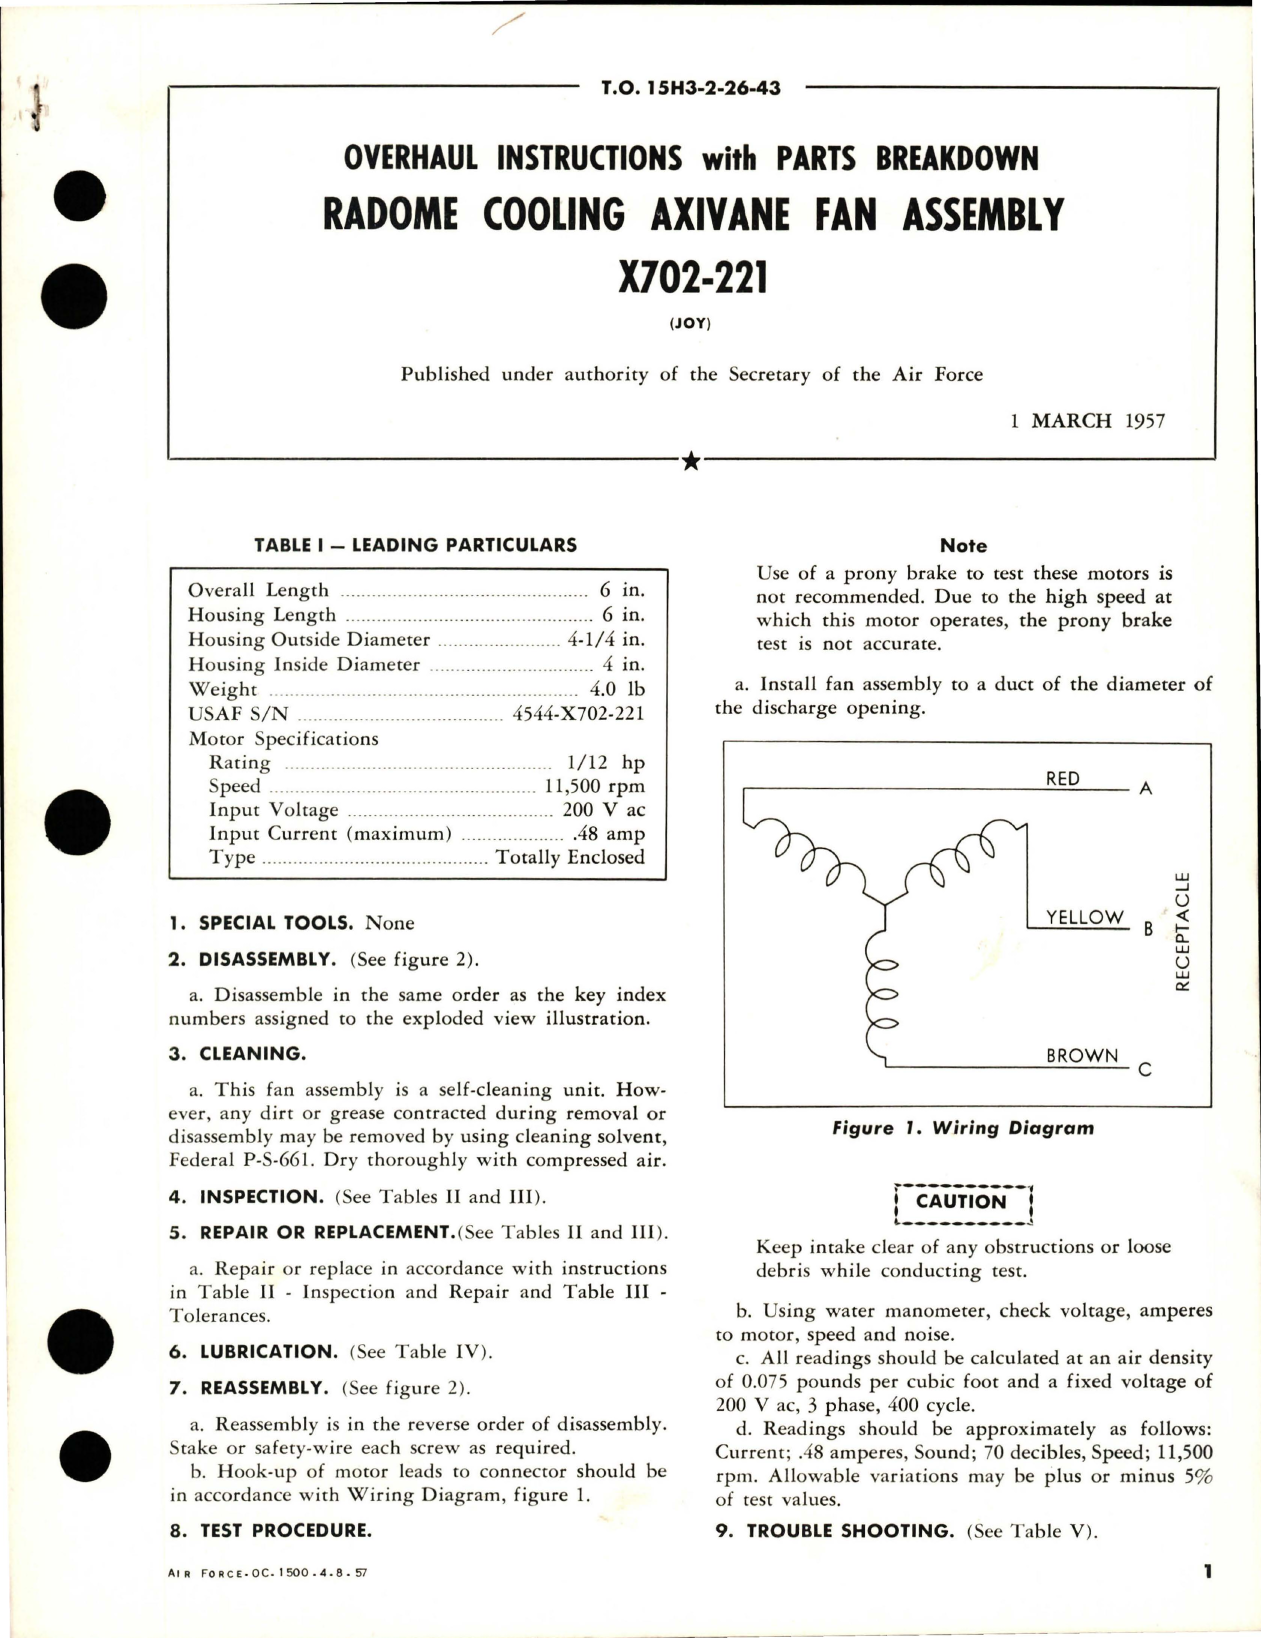 Sample page 1 from AirCorps Library document: Overhaul Instructions with Parts for Radome Cooling Axivane Fan Assembly - X702-221